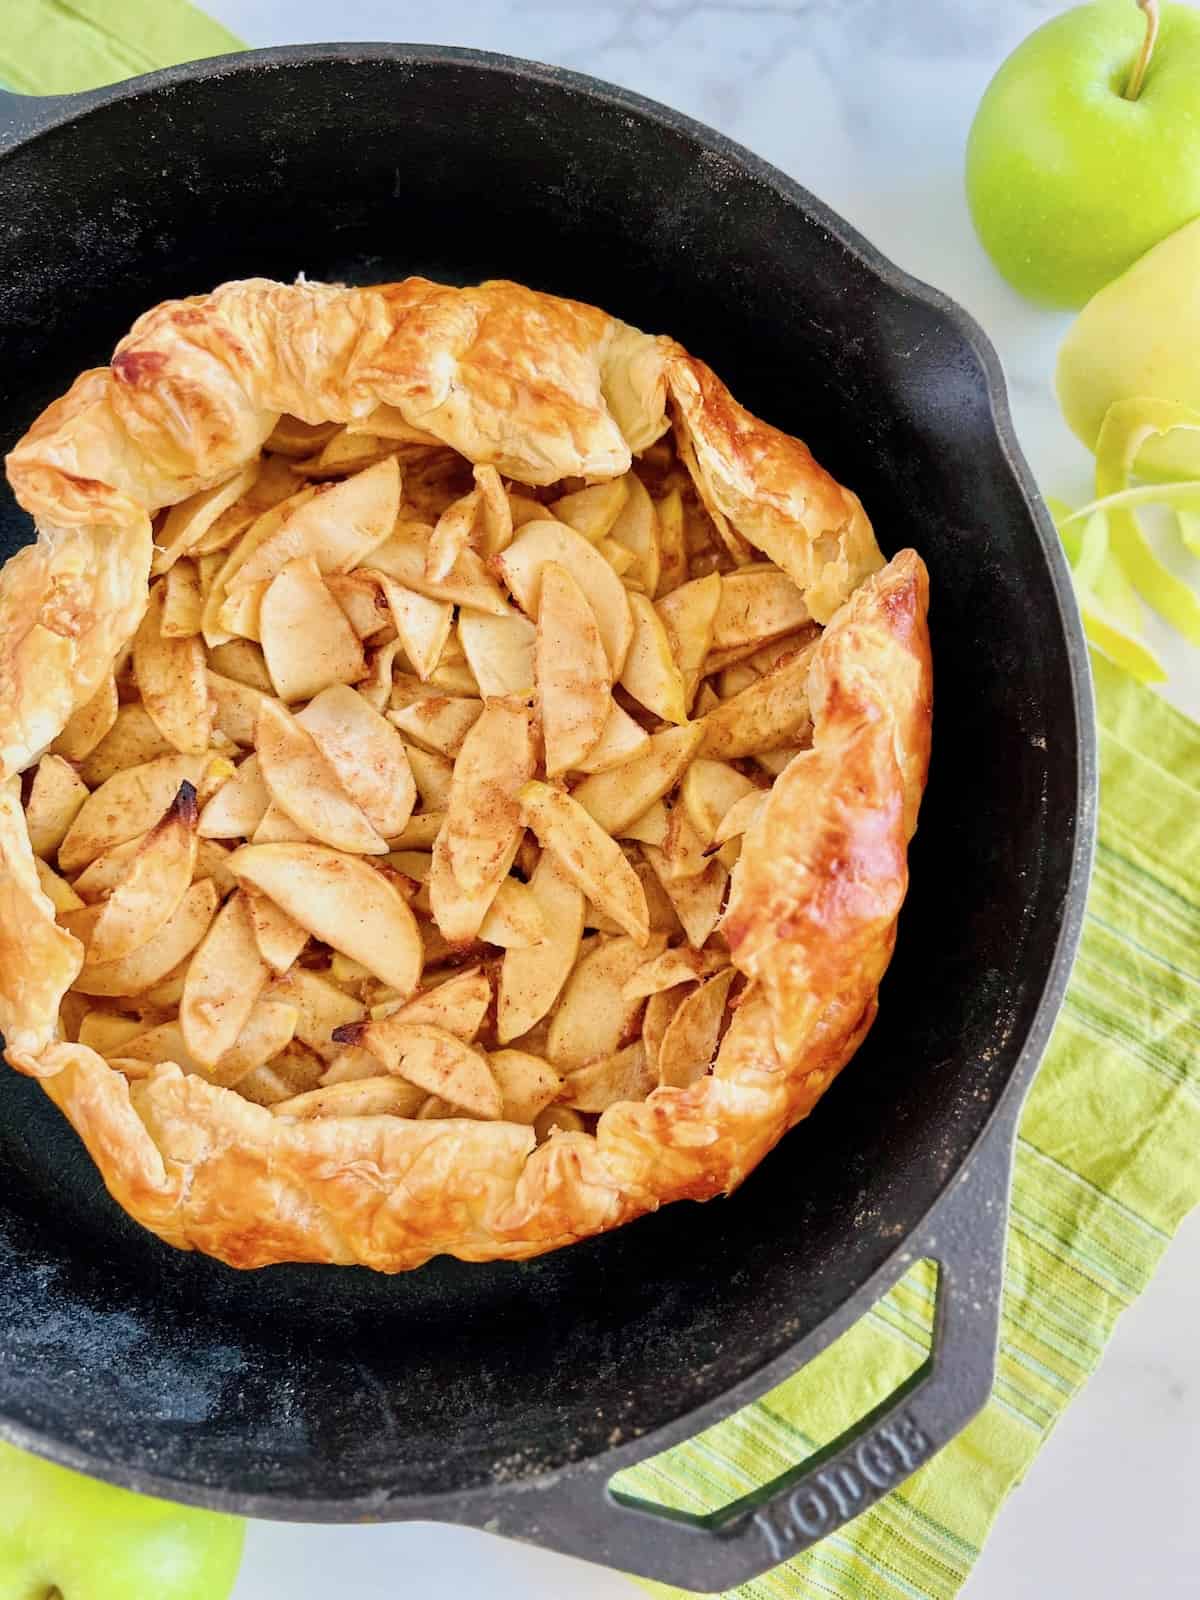 Puff Pastry Apple Galette In a cast iron skillet without any toppings.